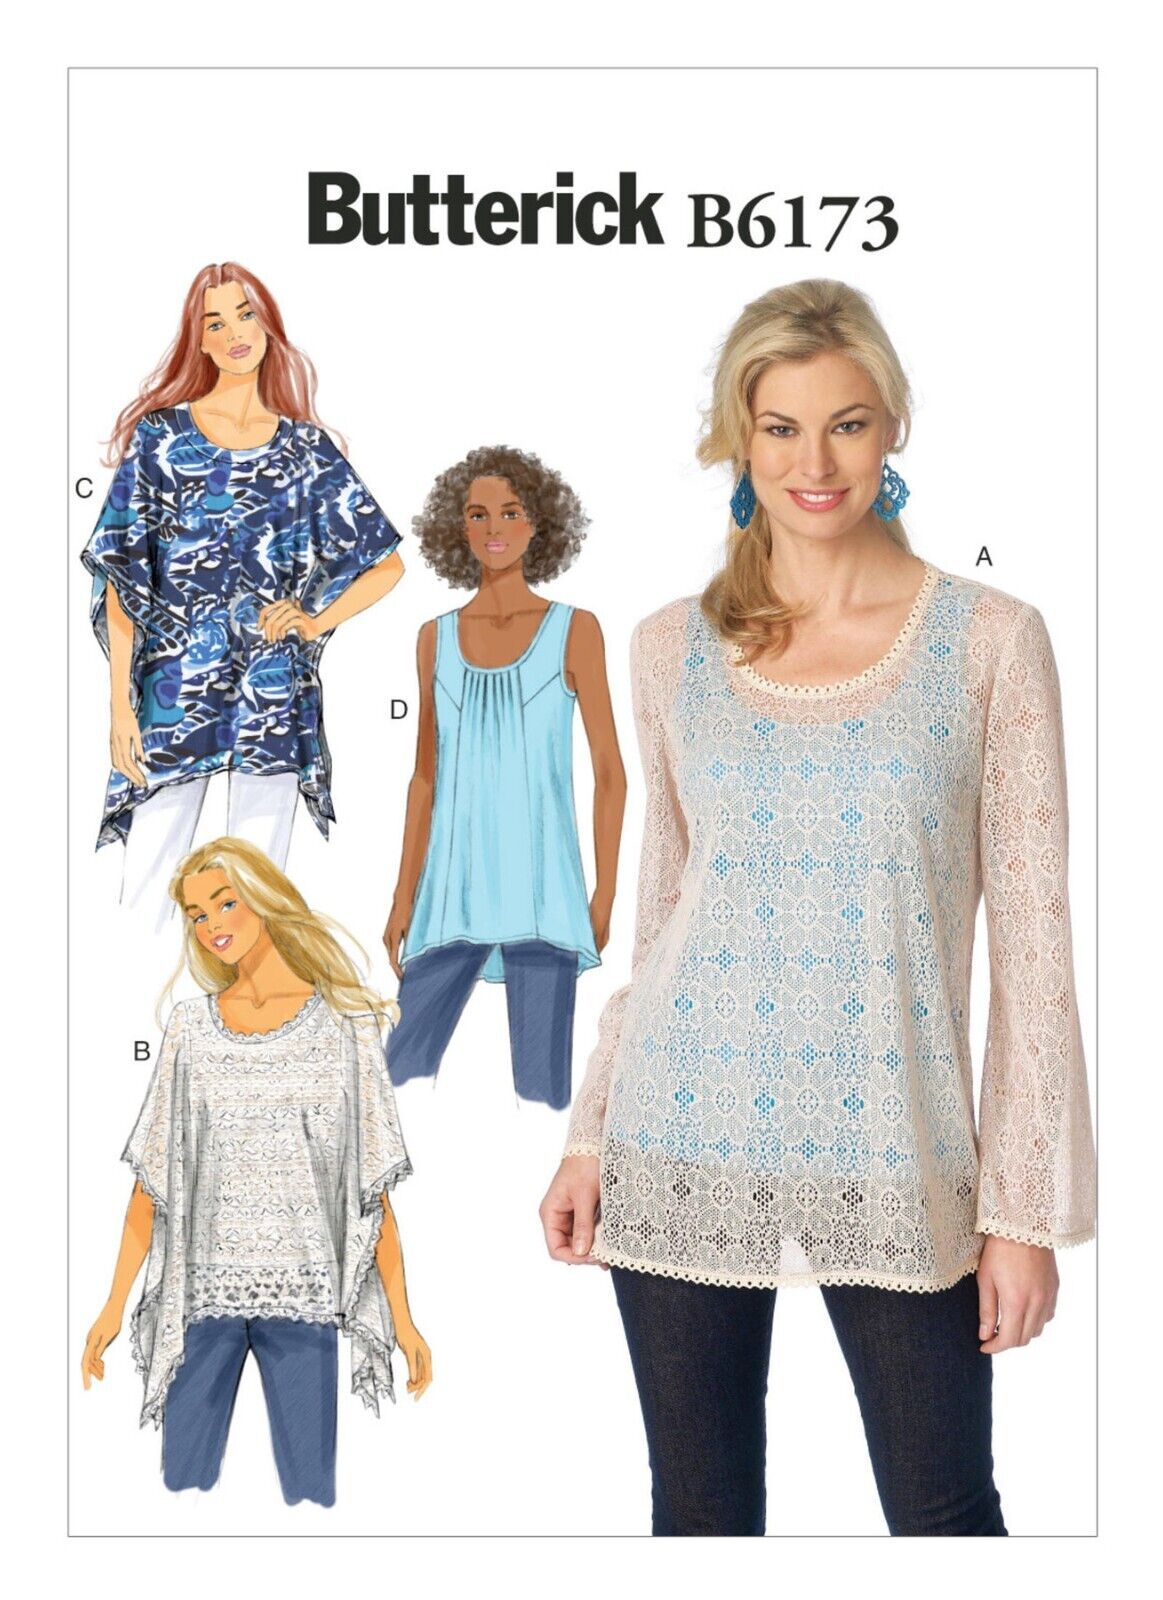 Butterick Pattern B6173 Tunic & Top with Style & Sleeve Options Size 6-14 Uncut